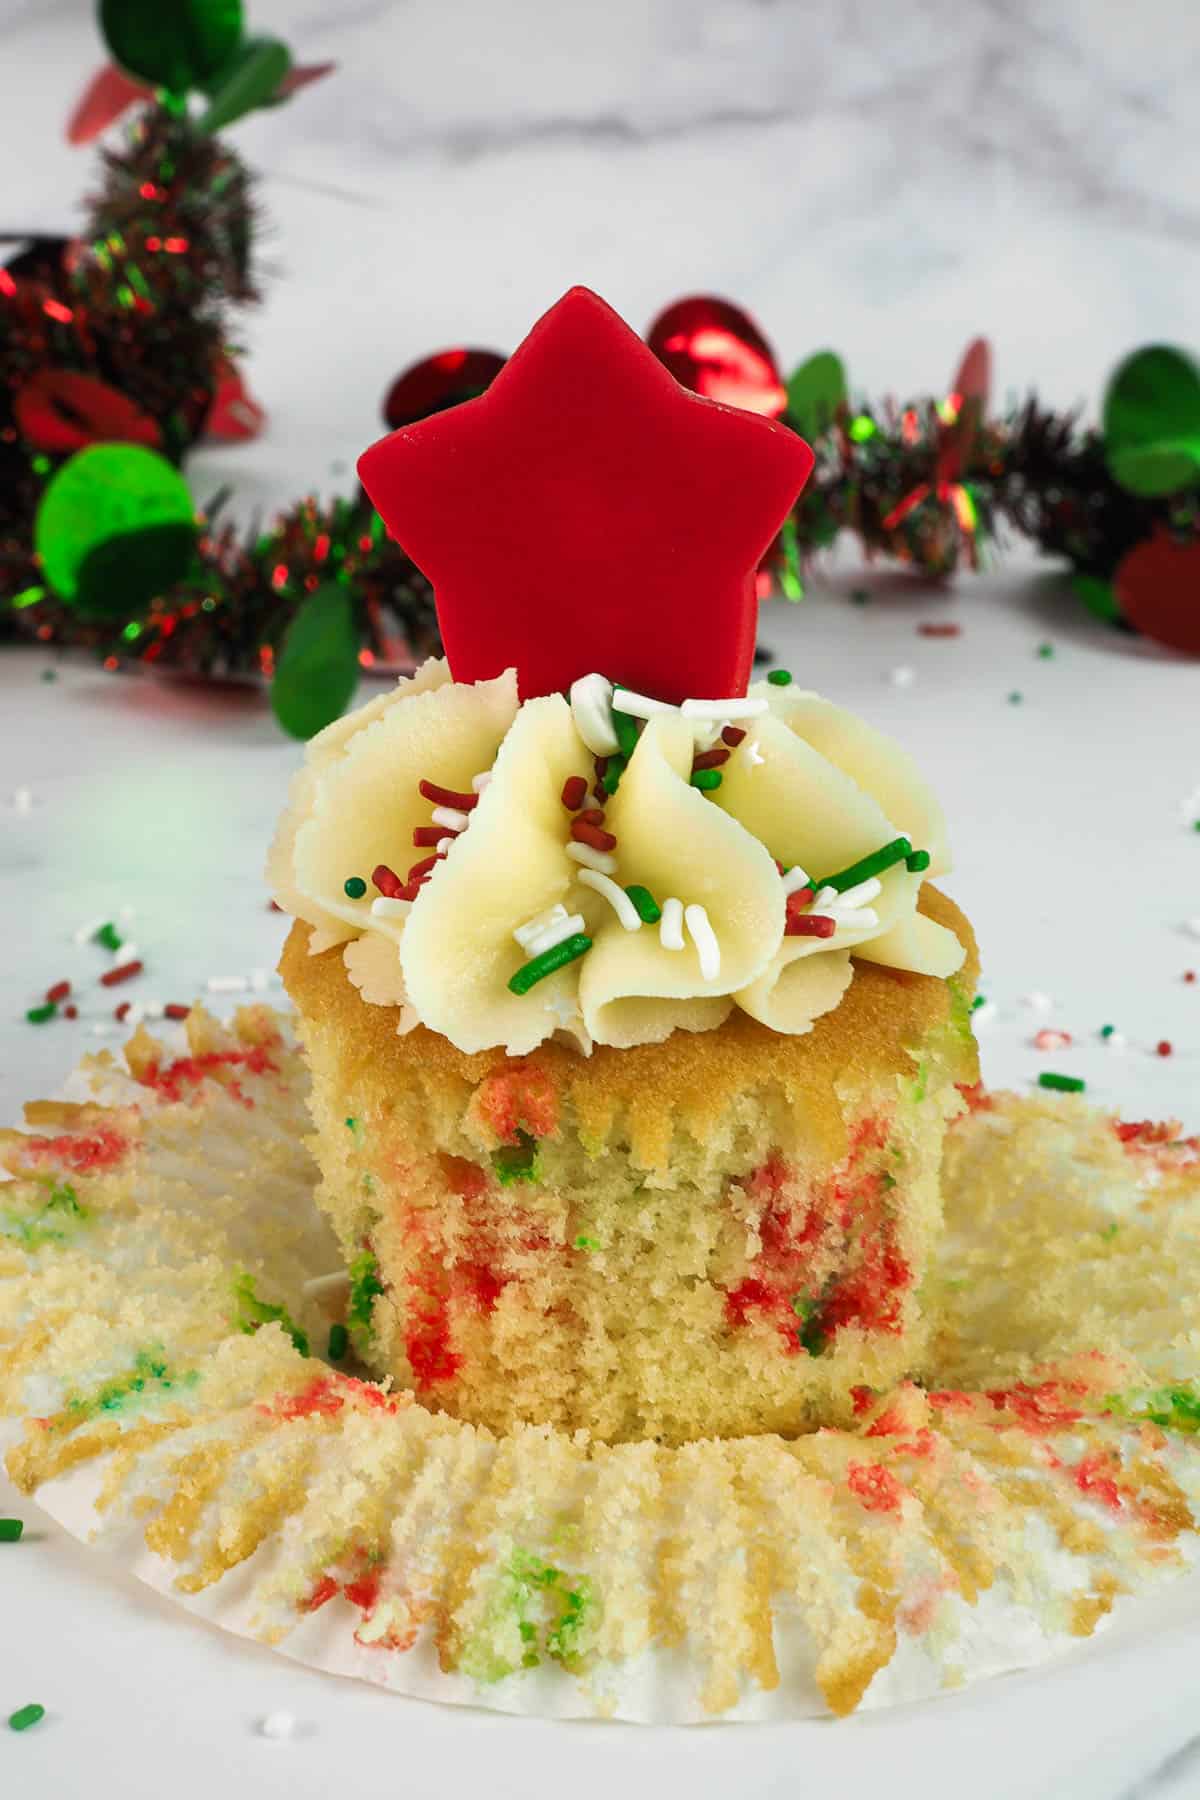 A sprinkles cupcake with its casing peeled off. Cupcake is decorated with simple buttercream swirl, a red star topper and red and green sprinkles.